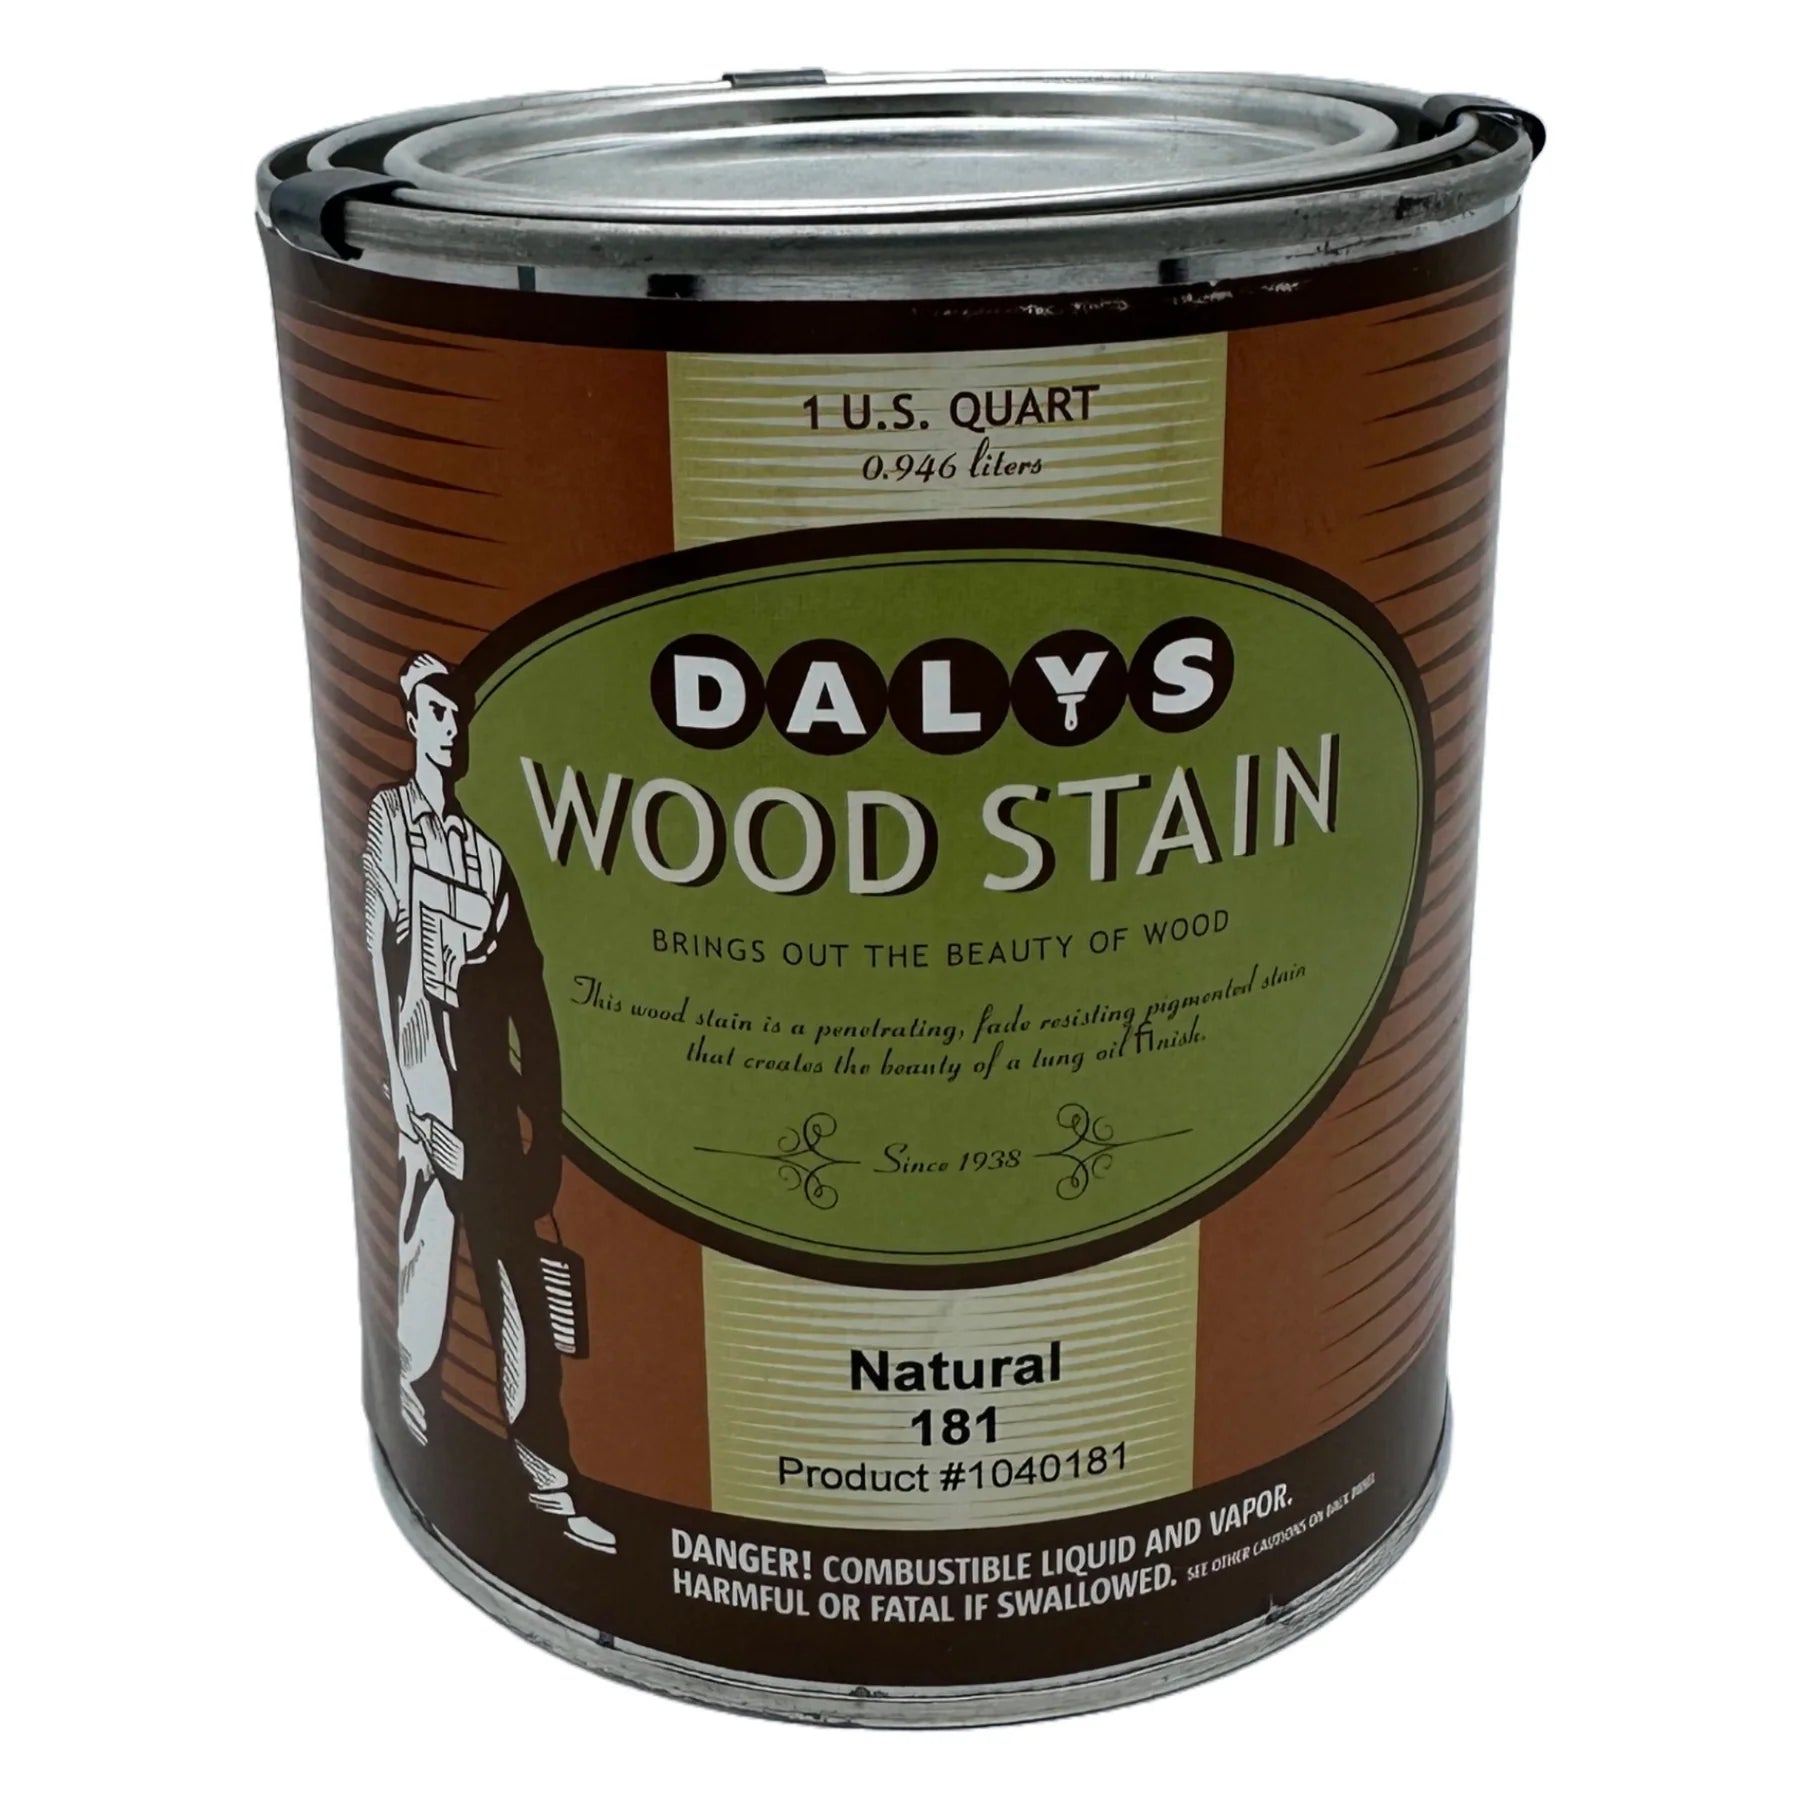 Wood Stain - Dalys